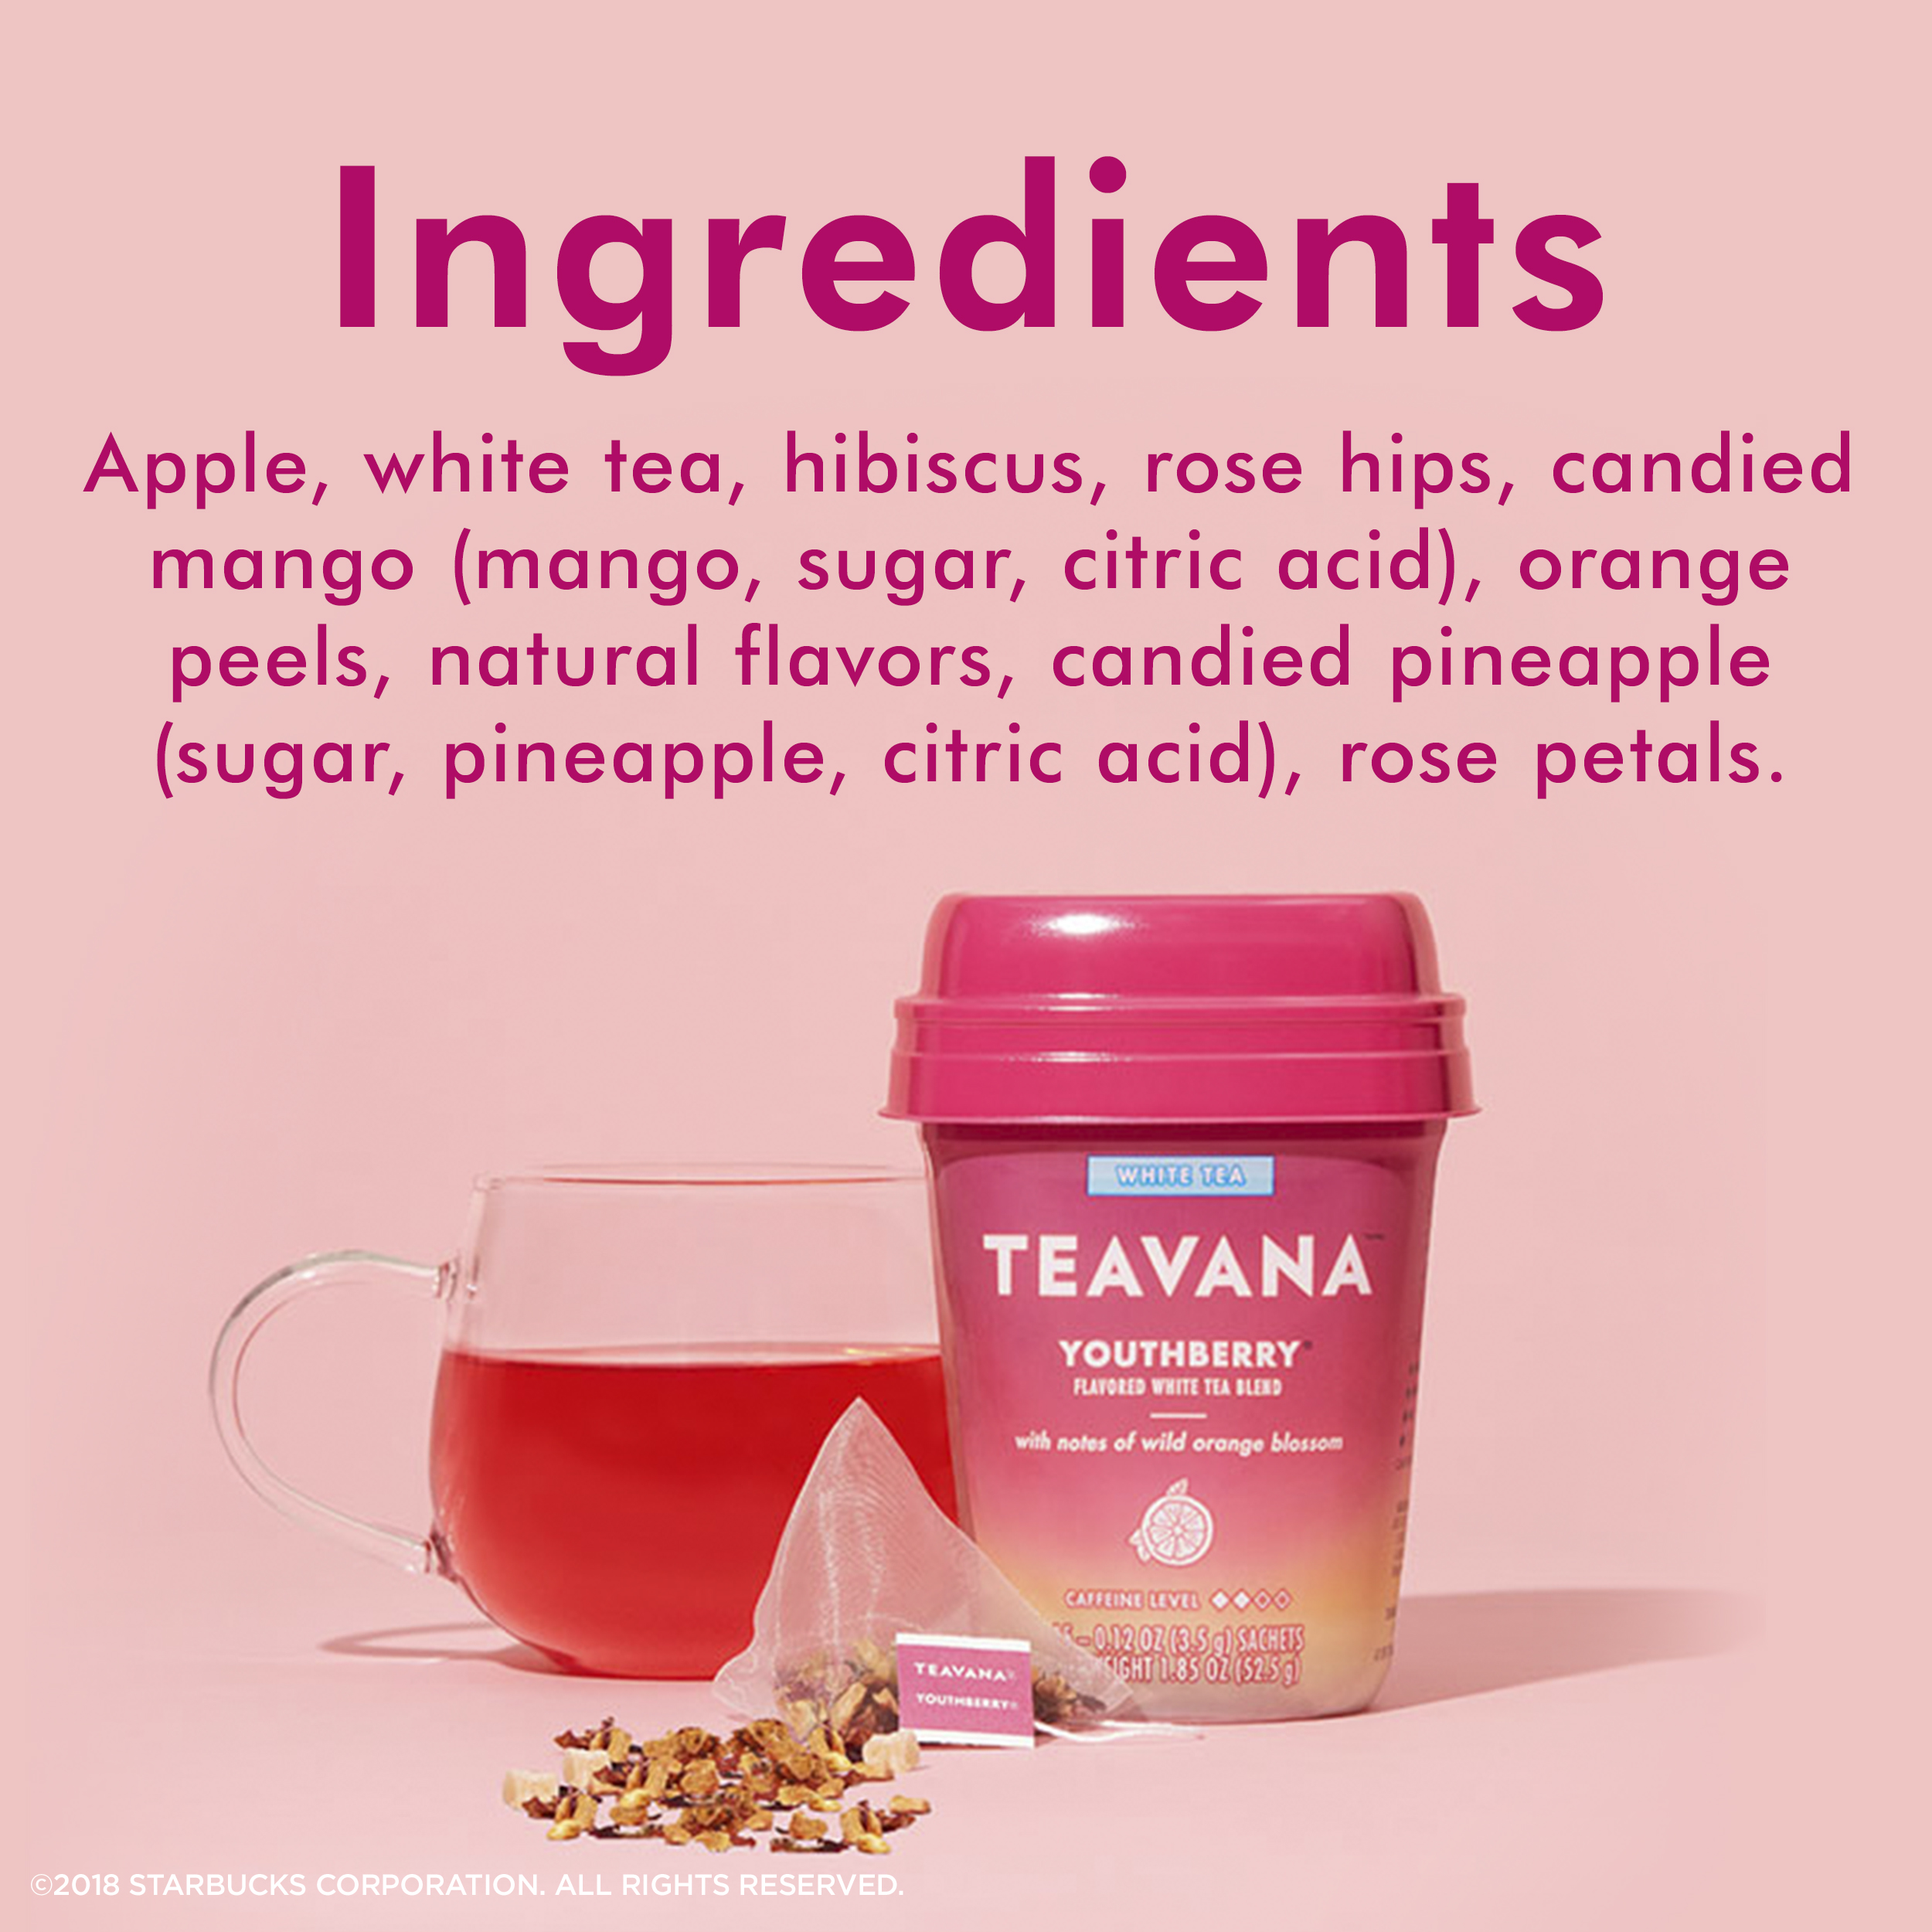 Teavana Youthberry, White Tea With Notes of Wild Orange Blossom, 15 Sachets - image 3 of 6